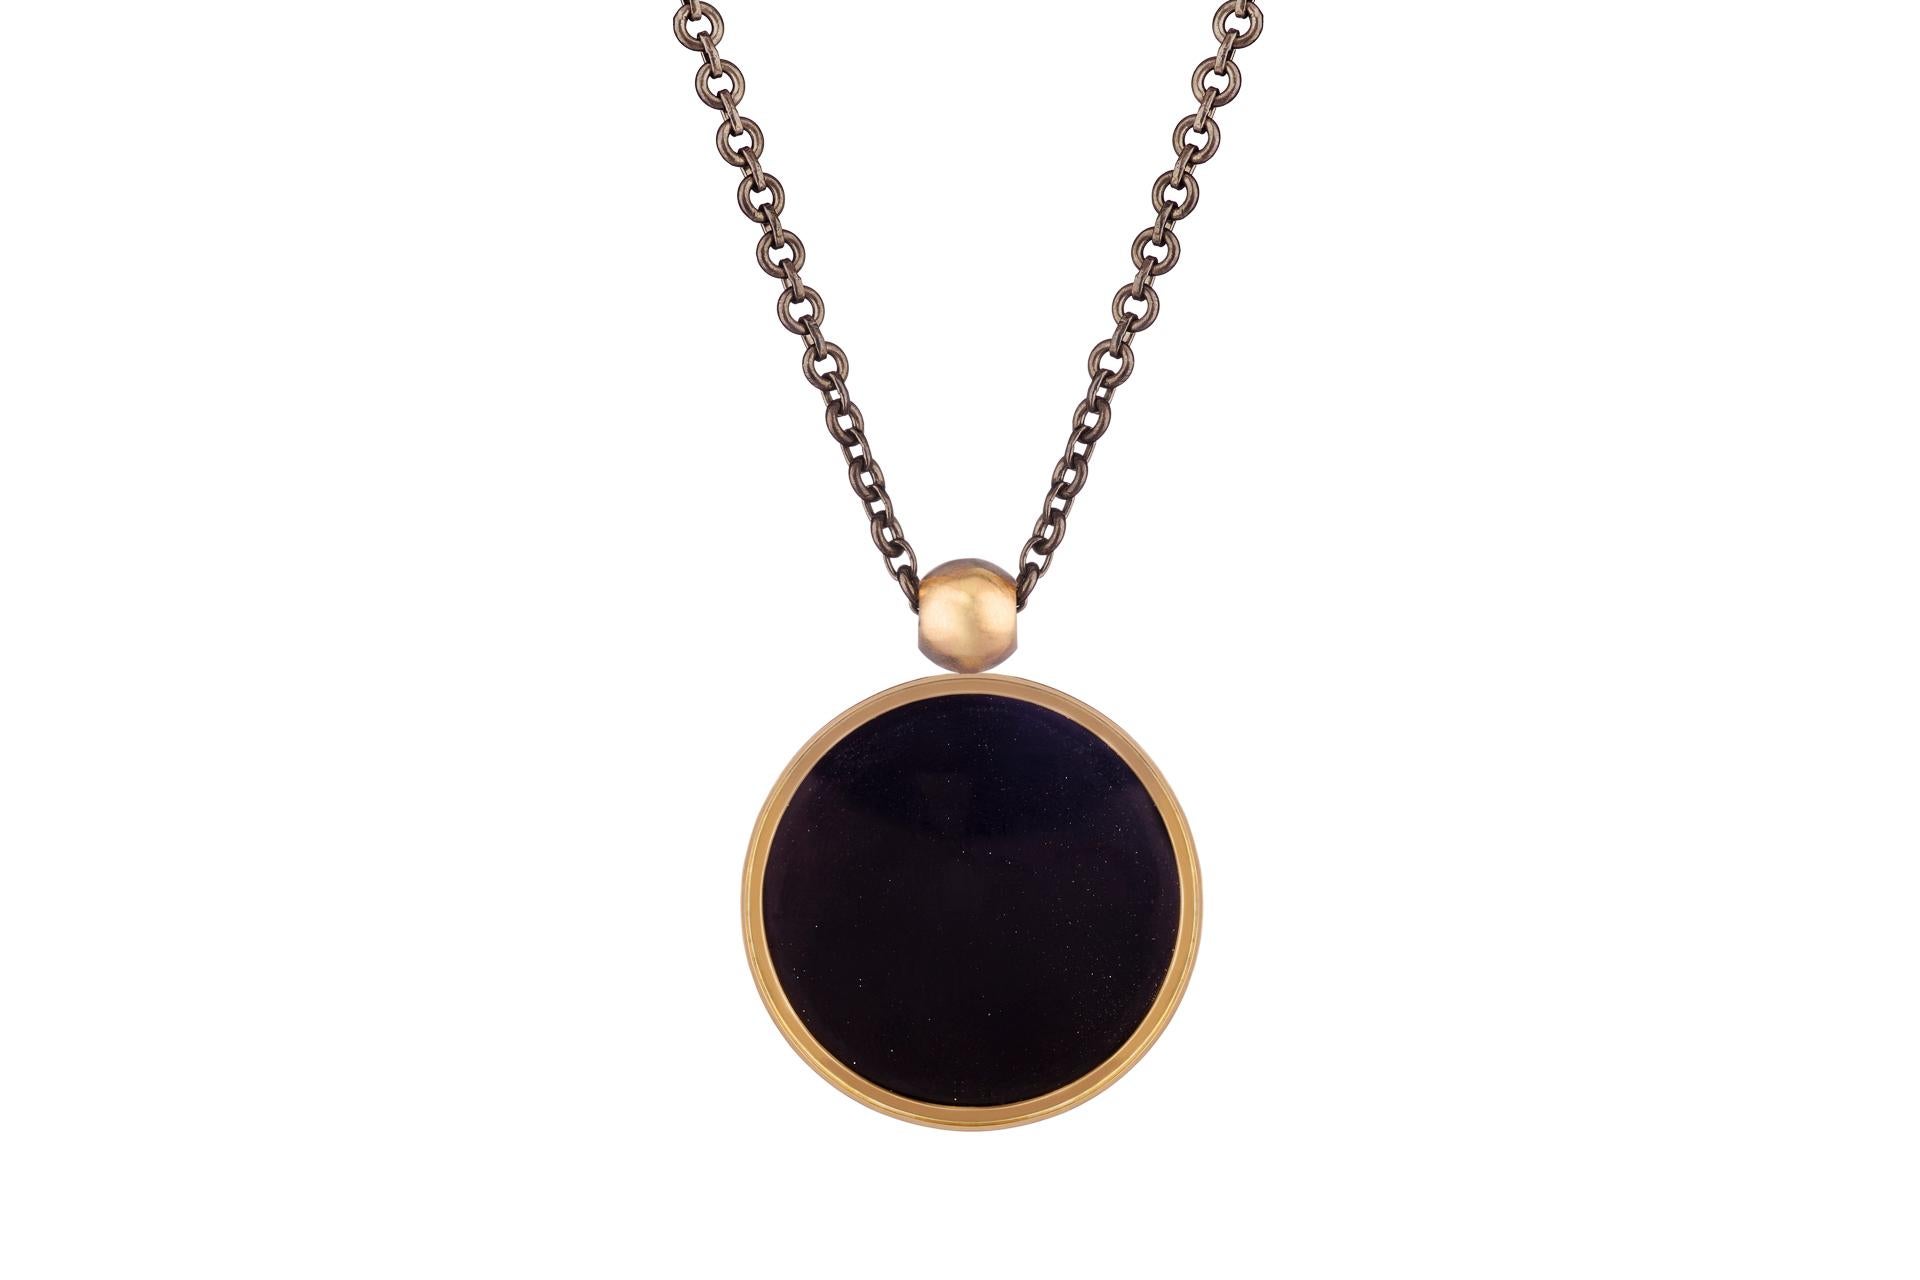 OUROBOROS Diamond and Onyx Pendant with 18 Karat Gold Chain necklace For Sale 12